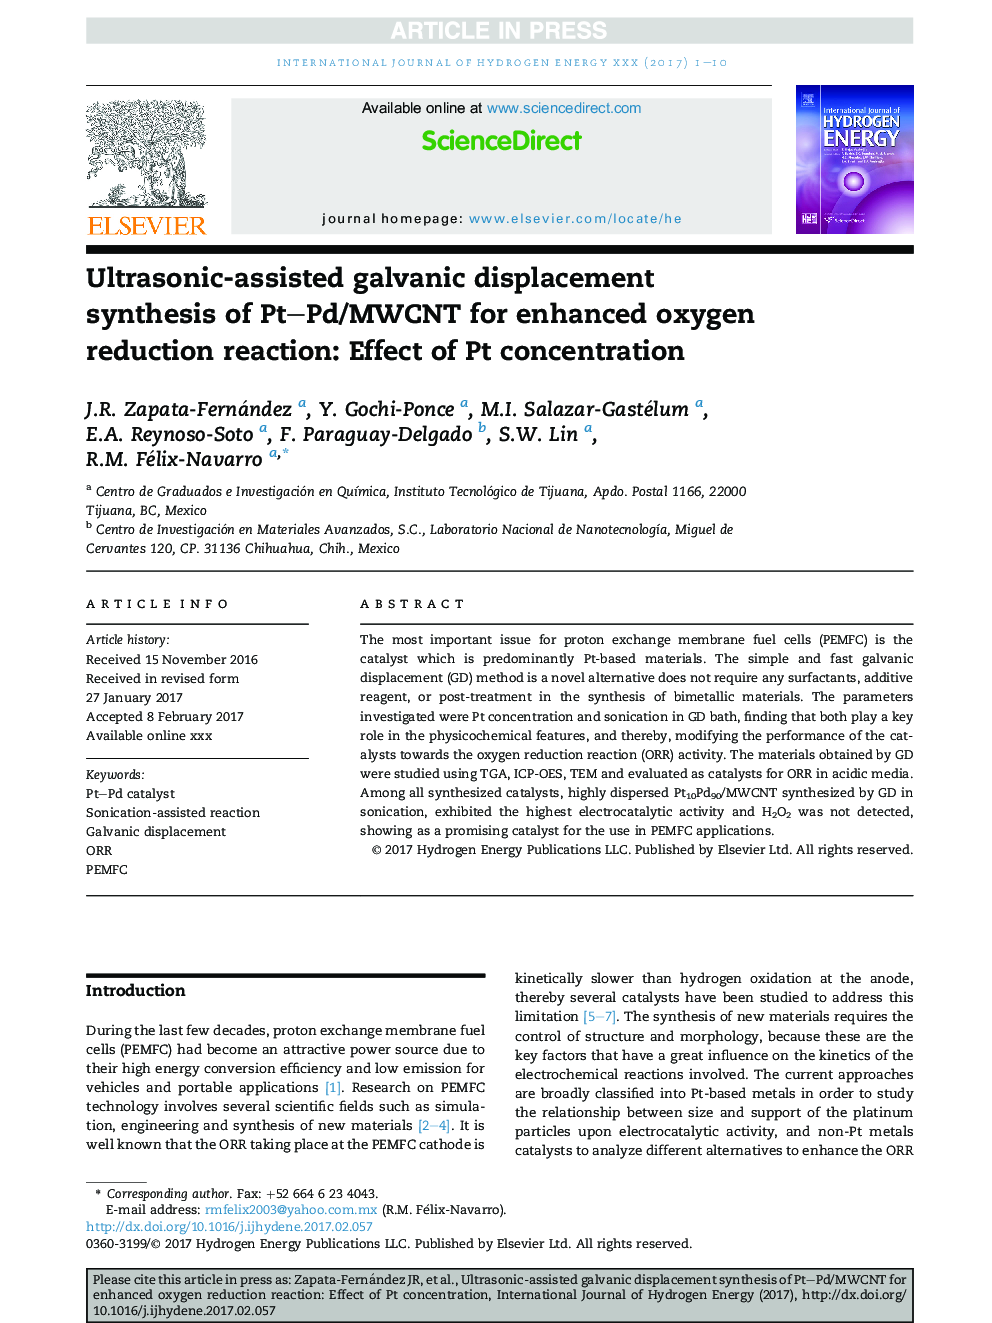 Ultrasonic-assisted galvanic displacement synthesis of Pt-Pd/MWCNT for enhanced oxygen reduction reaction: Effect of Pt concentration